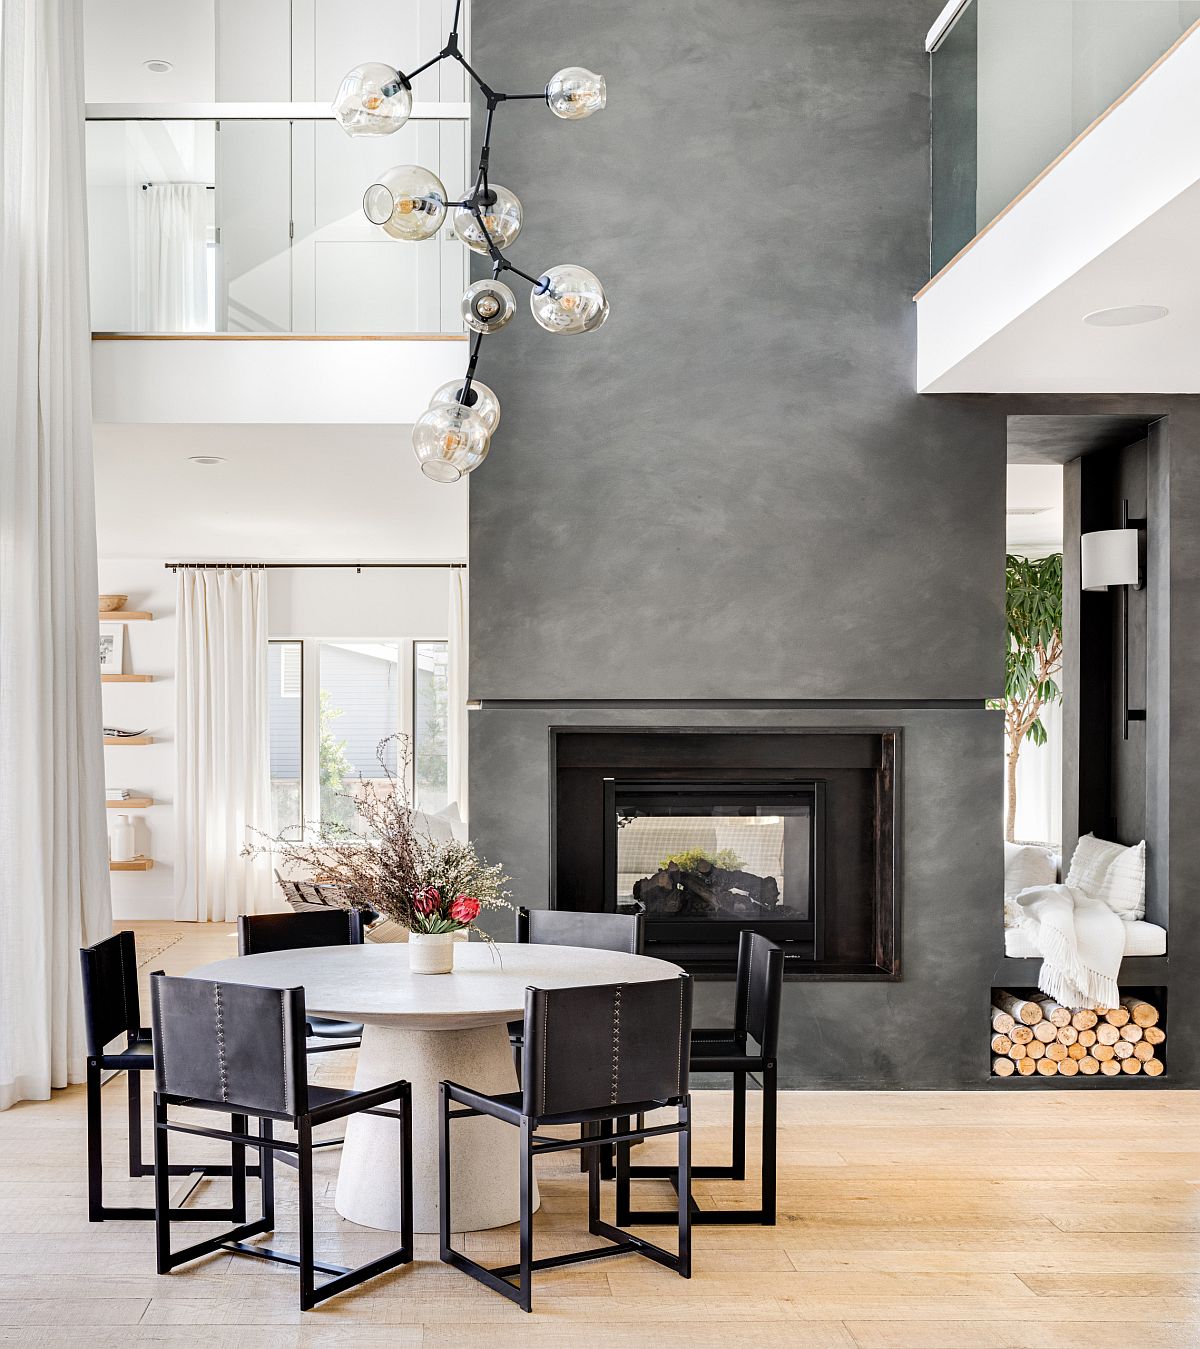 Fabulous-fireplace-in-gray-cement-becomes-the-focal-point-of-this-amazing-dining-space-24172